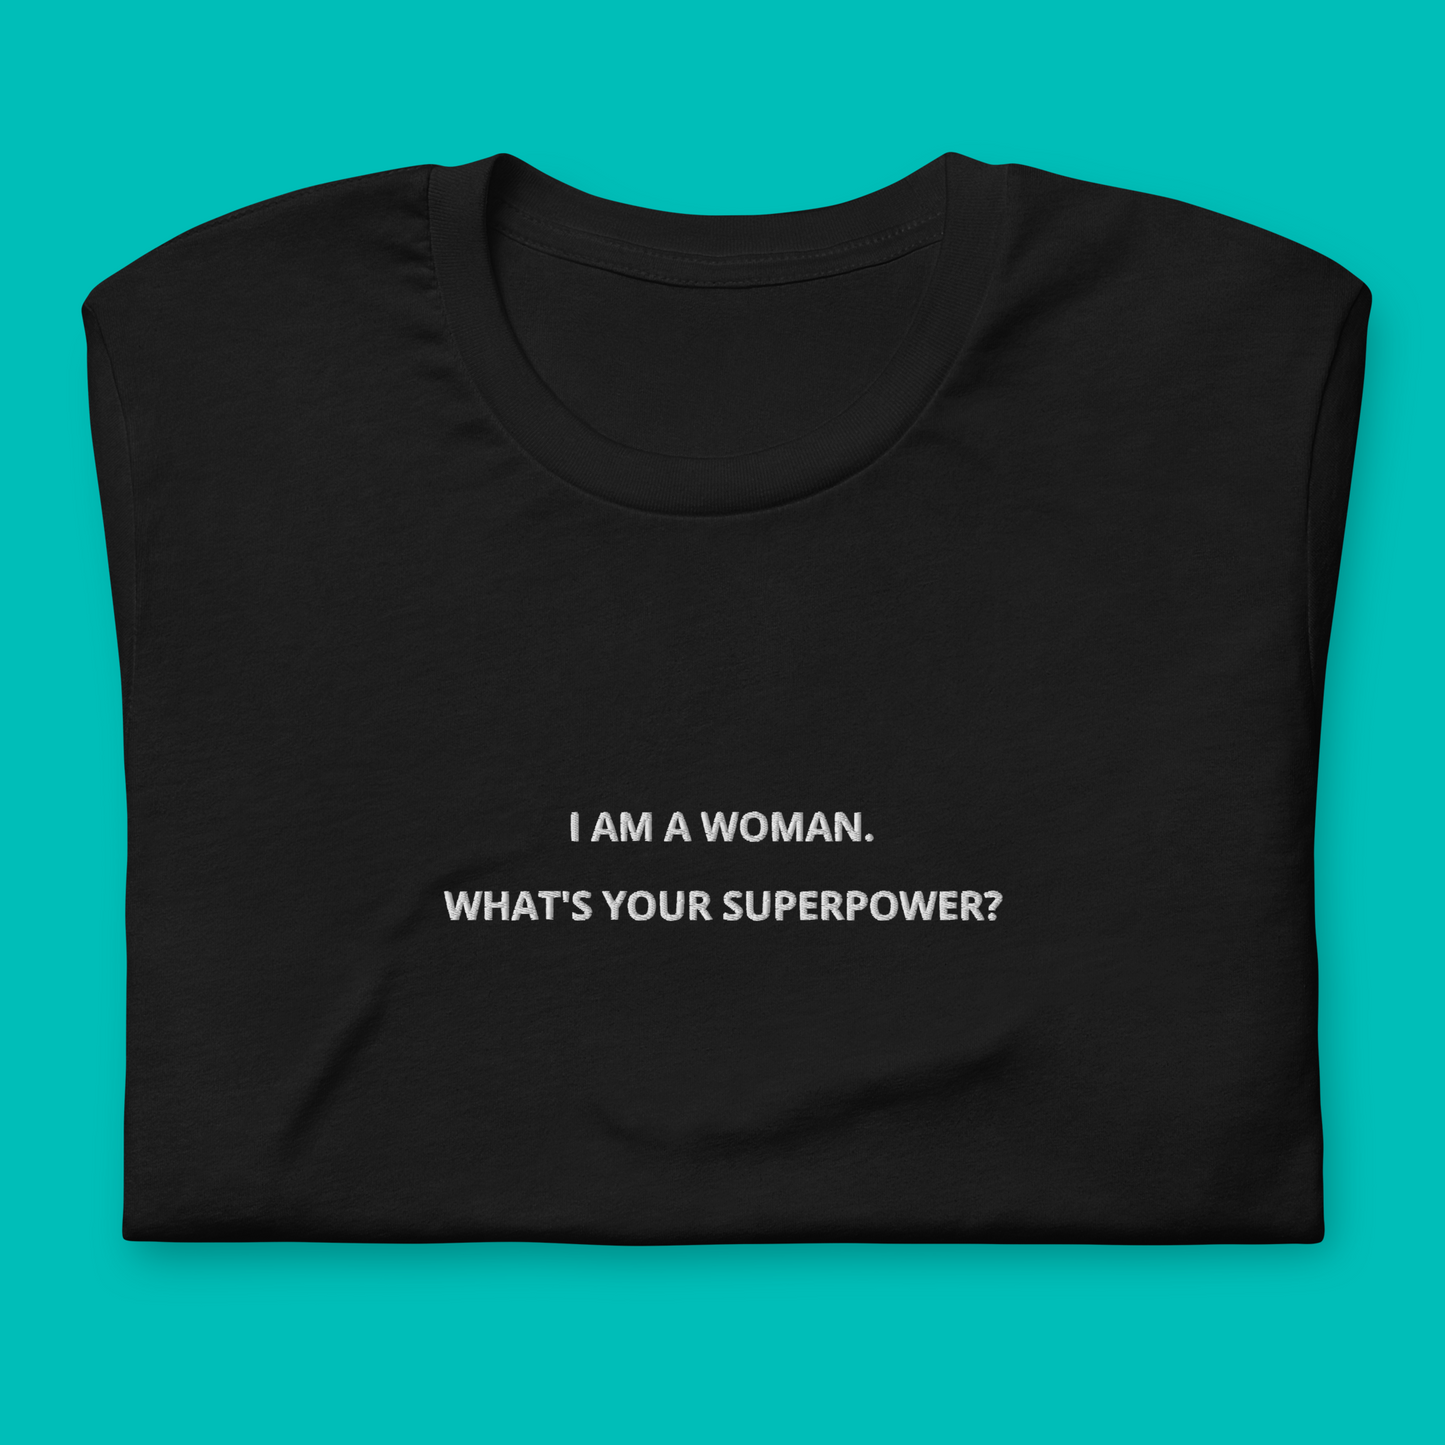 I AM A WOMAN. WHAT'S YOUR SUPERPOWER? - besticktes T-Shirt